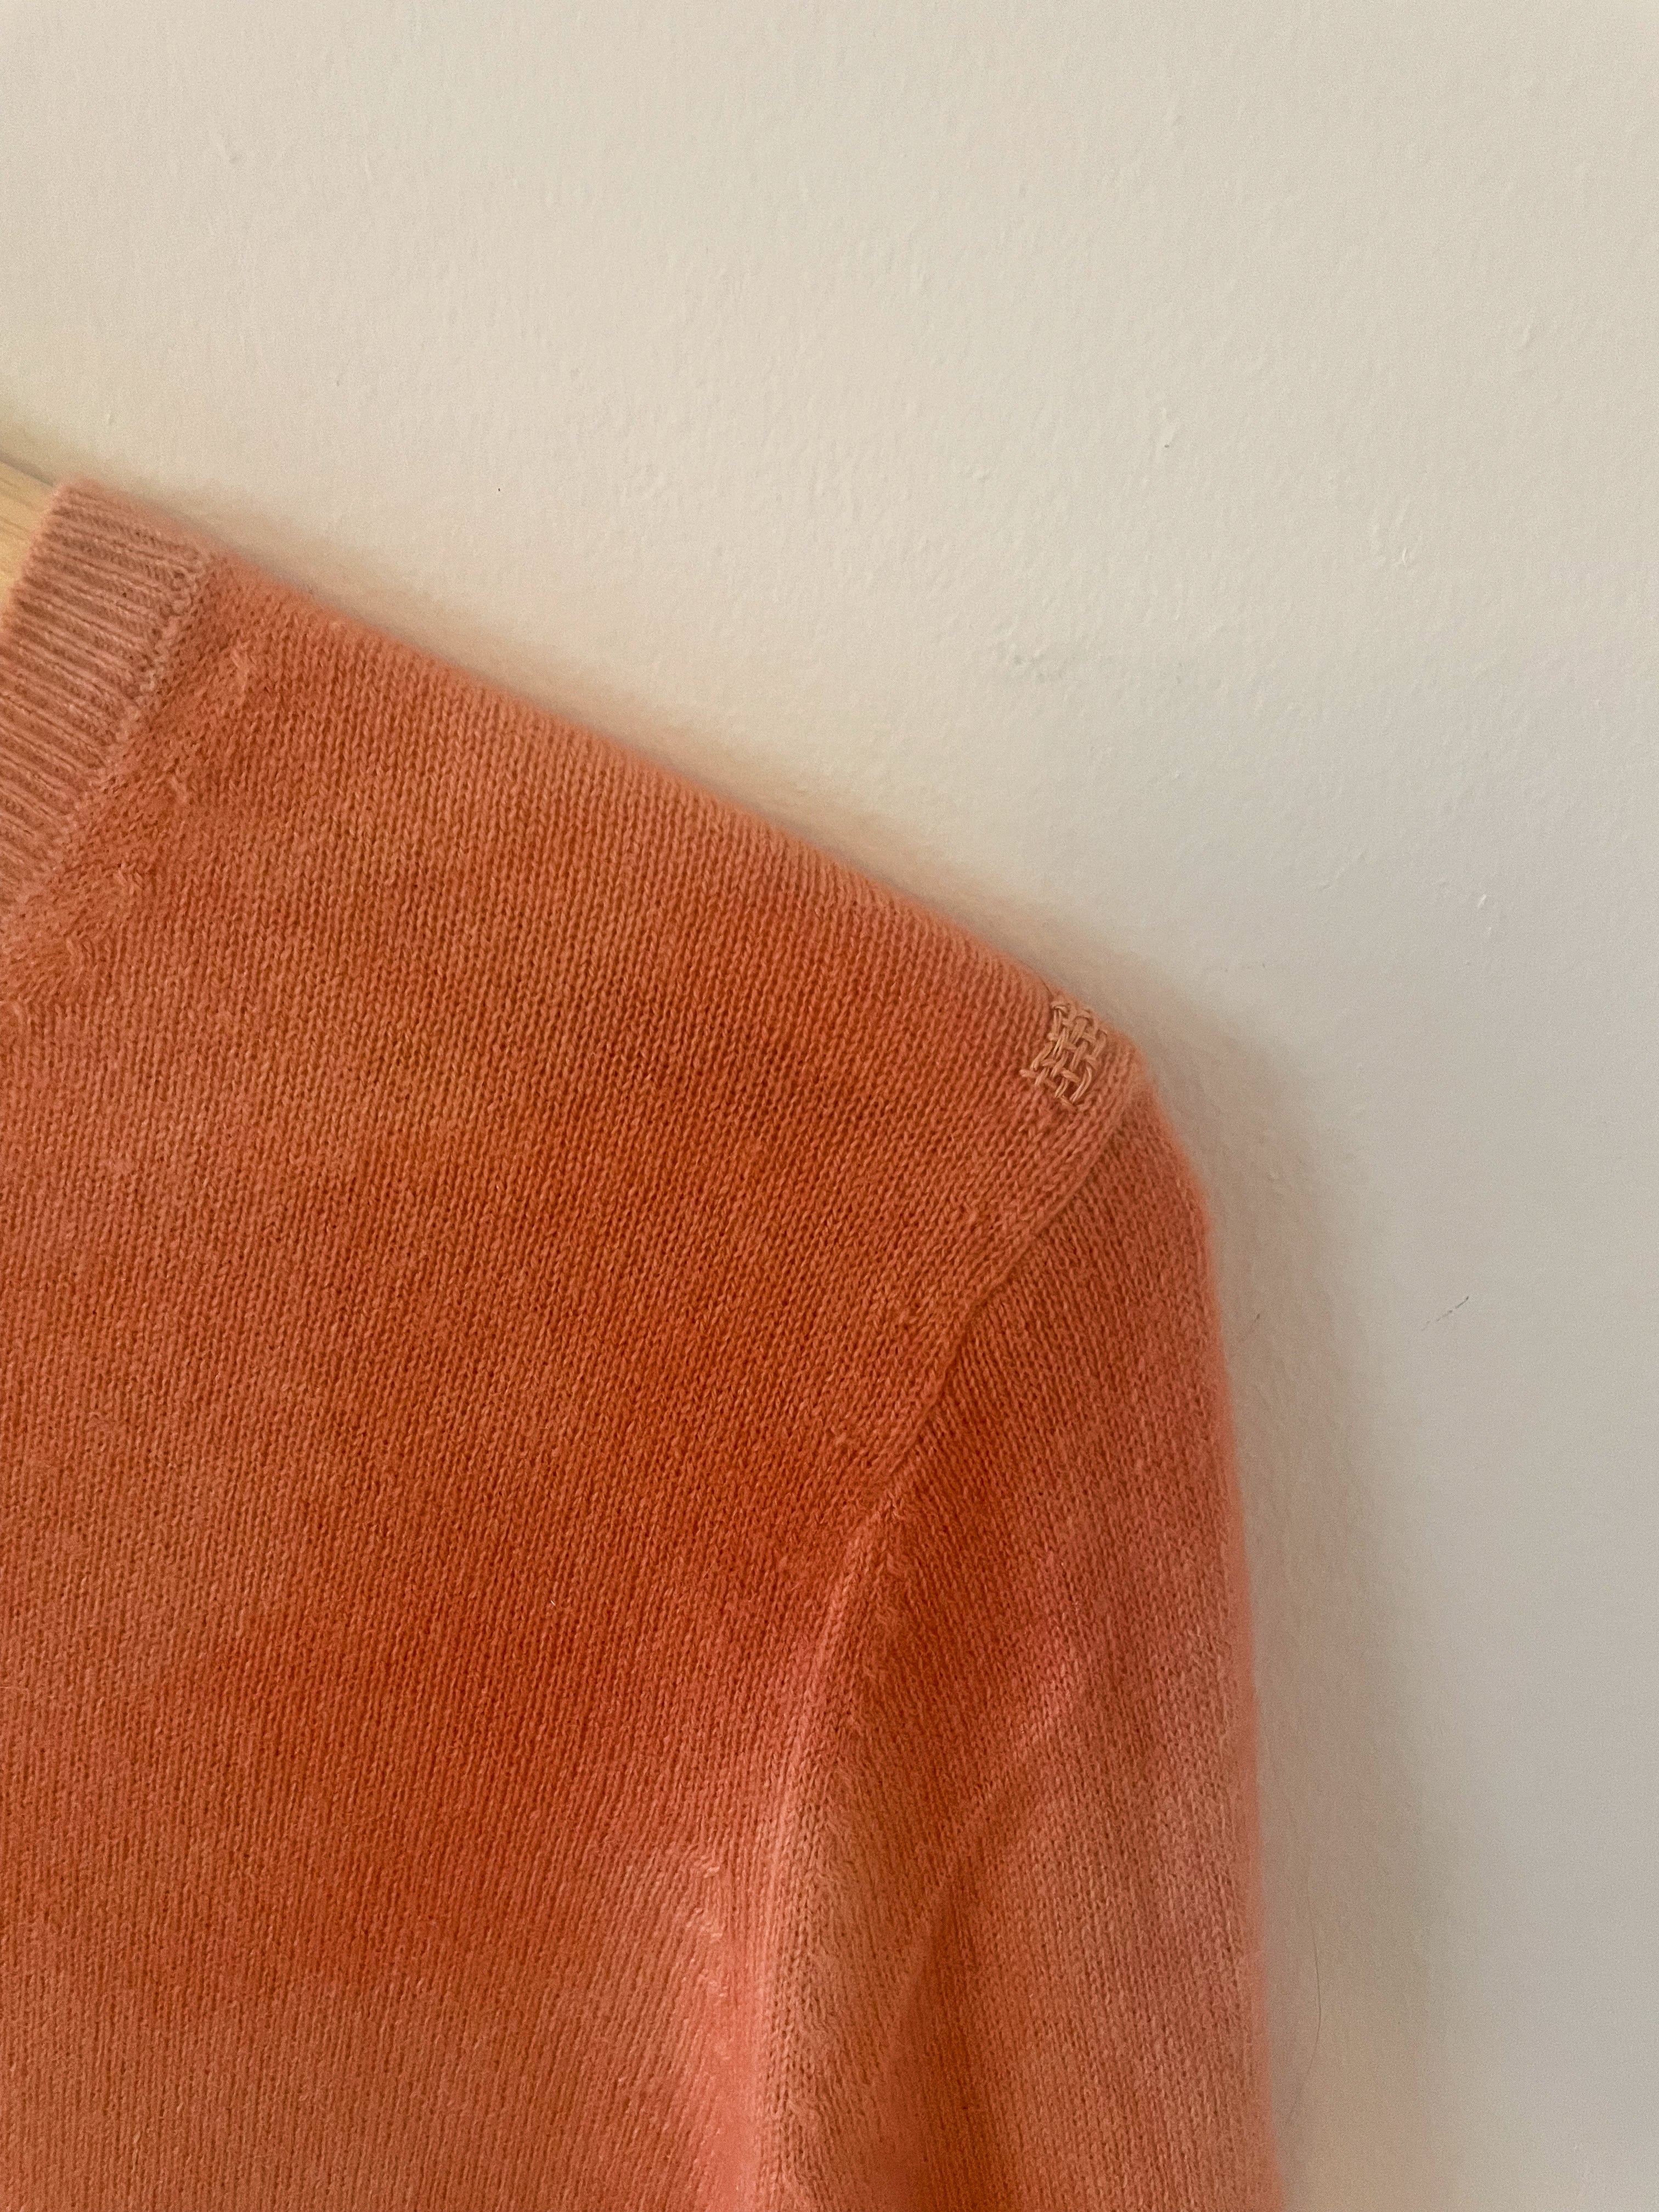 Hand Dyed Cashmere Sweater - Madder Root